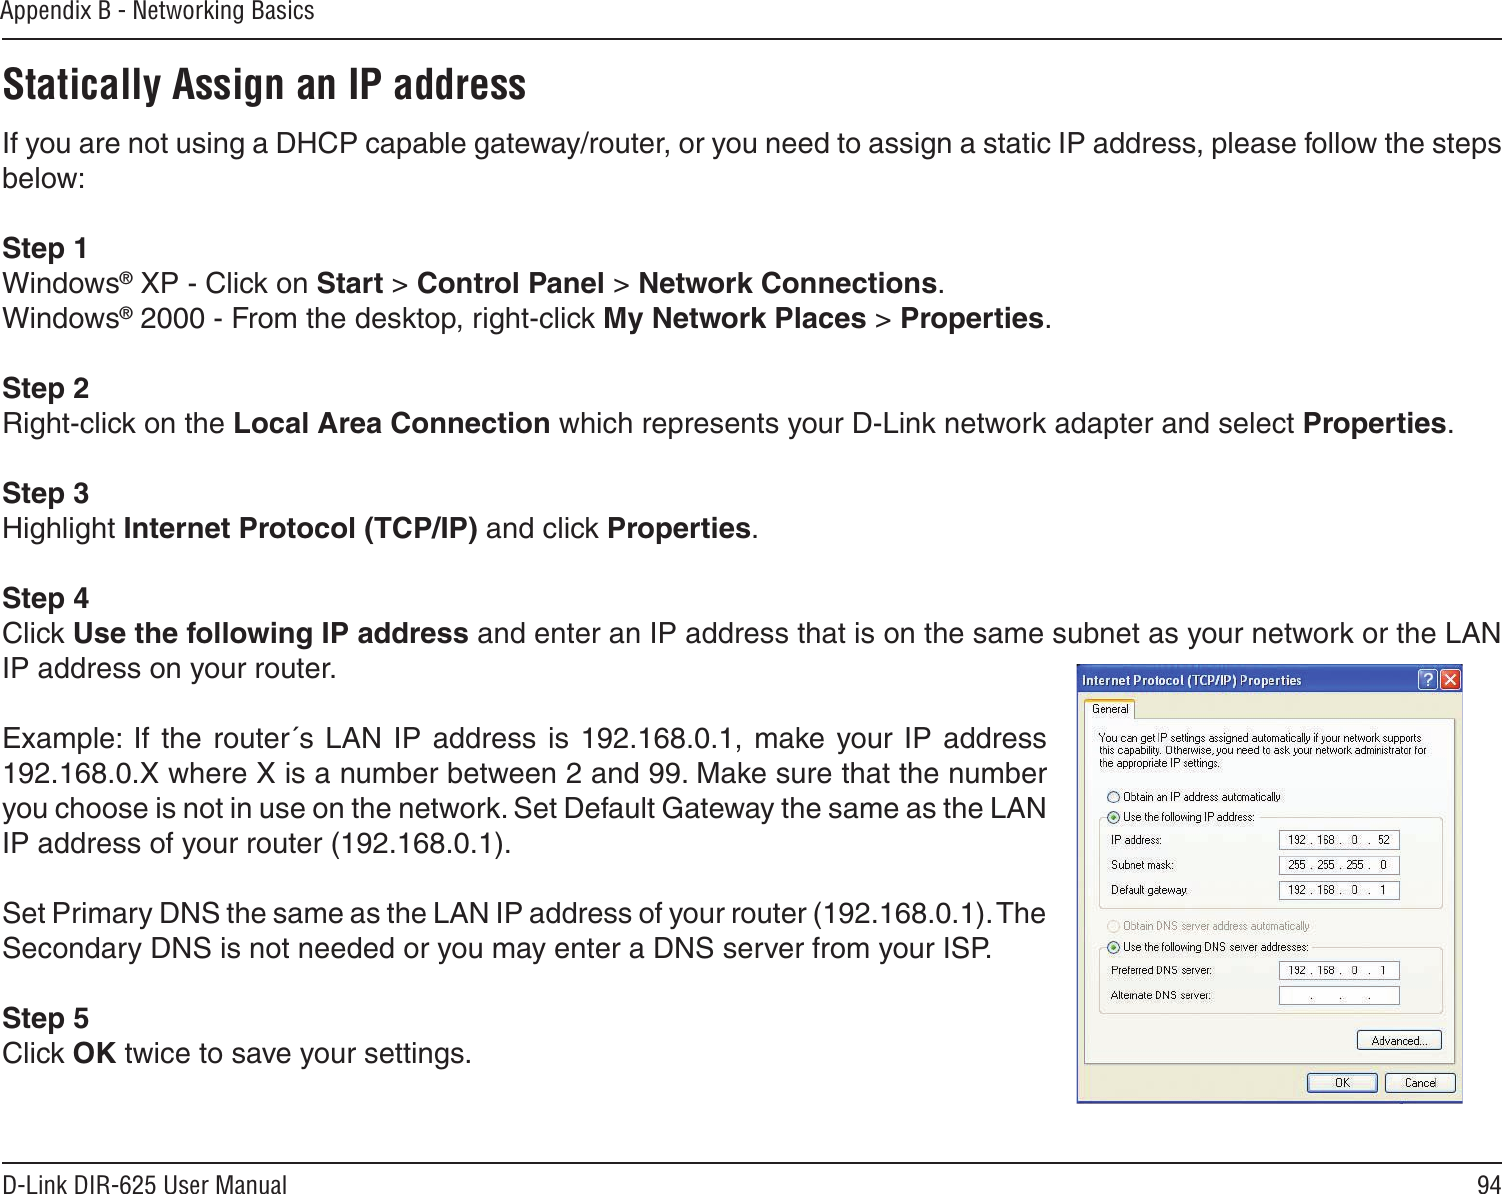 94D-Link DIR-625 User ManualAppendix B - Networking BasicsStatically Assign an IP addressIf you are not using a DHCP capable gateway/router, or you need to assign a static IP address, please follow the steps below:Step 1Windows® XP - Click on Start &gt; Control Panel &gt; Network Connections.Windows® 2000 - From the desktop, right-click My Network Places &gt; Properties.Step 2Right-click on the Local Area Connection which represents your D-Link network adapter and select Properties.Step 3Highlight Internet Protocol (TCP/IP) and click Properties.Step 4Click Use the following IP address and enter an IP address that is on the same subnet as your network or the LAN IP address on your router. Example:  If  the  router´s  LAN  IP  address  is 192.168.0.1, make your IP  address 192.168.0.X where X is a number between 2 and 99. Make sure that the number you choose is not in use on the network. Set Default Gateway the same as the LAN IP address of your router (192.168.0.1). Set Primary DNS the same as the LAN IP address of your router (192.168.0.1). The Secondary DNS is not needed or you may enter a DNS server from your ISP.Step 5Click OK twice to save your settings.